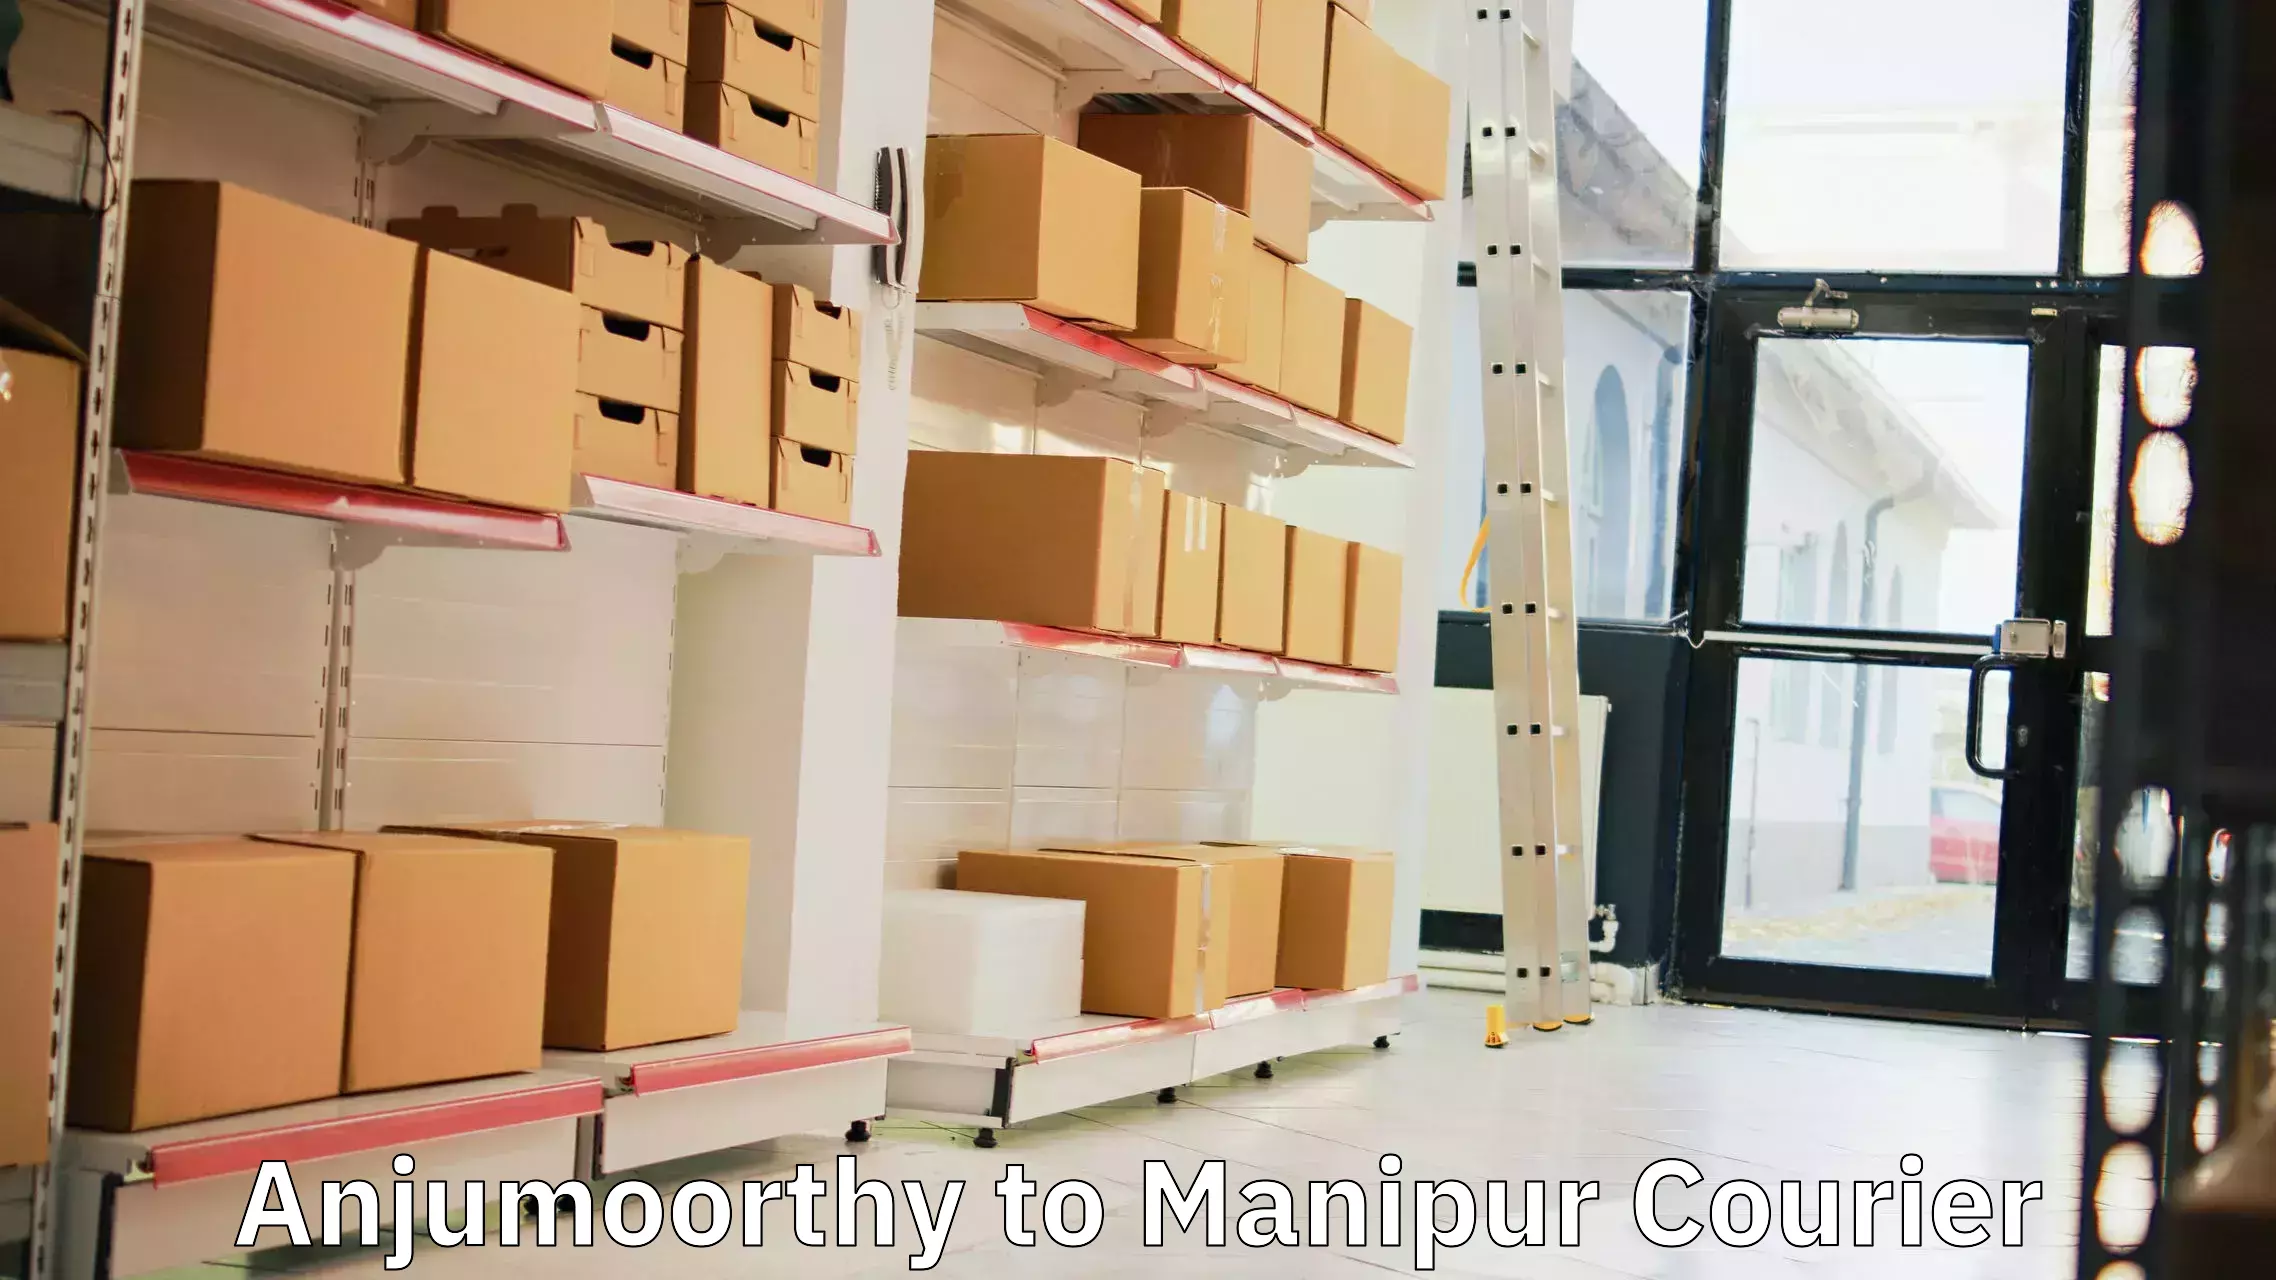 Special handling courier Anjumoorthy to Imphal